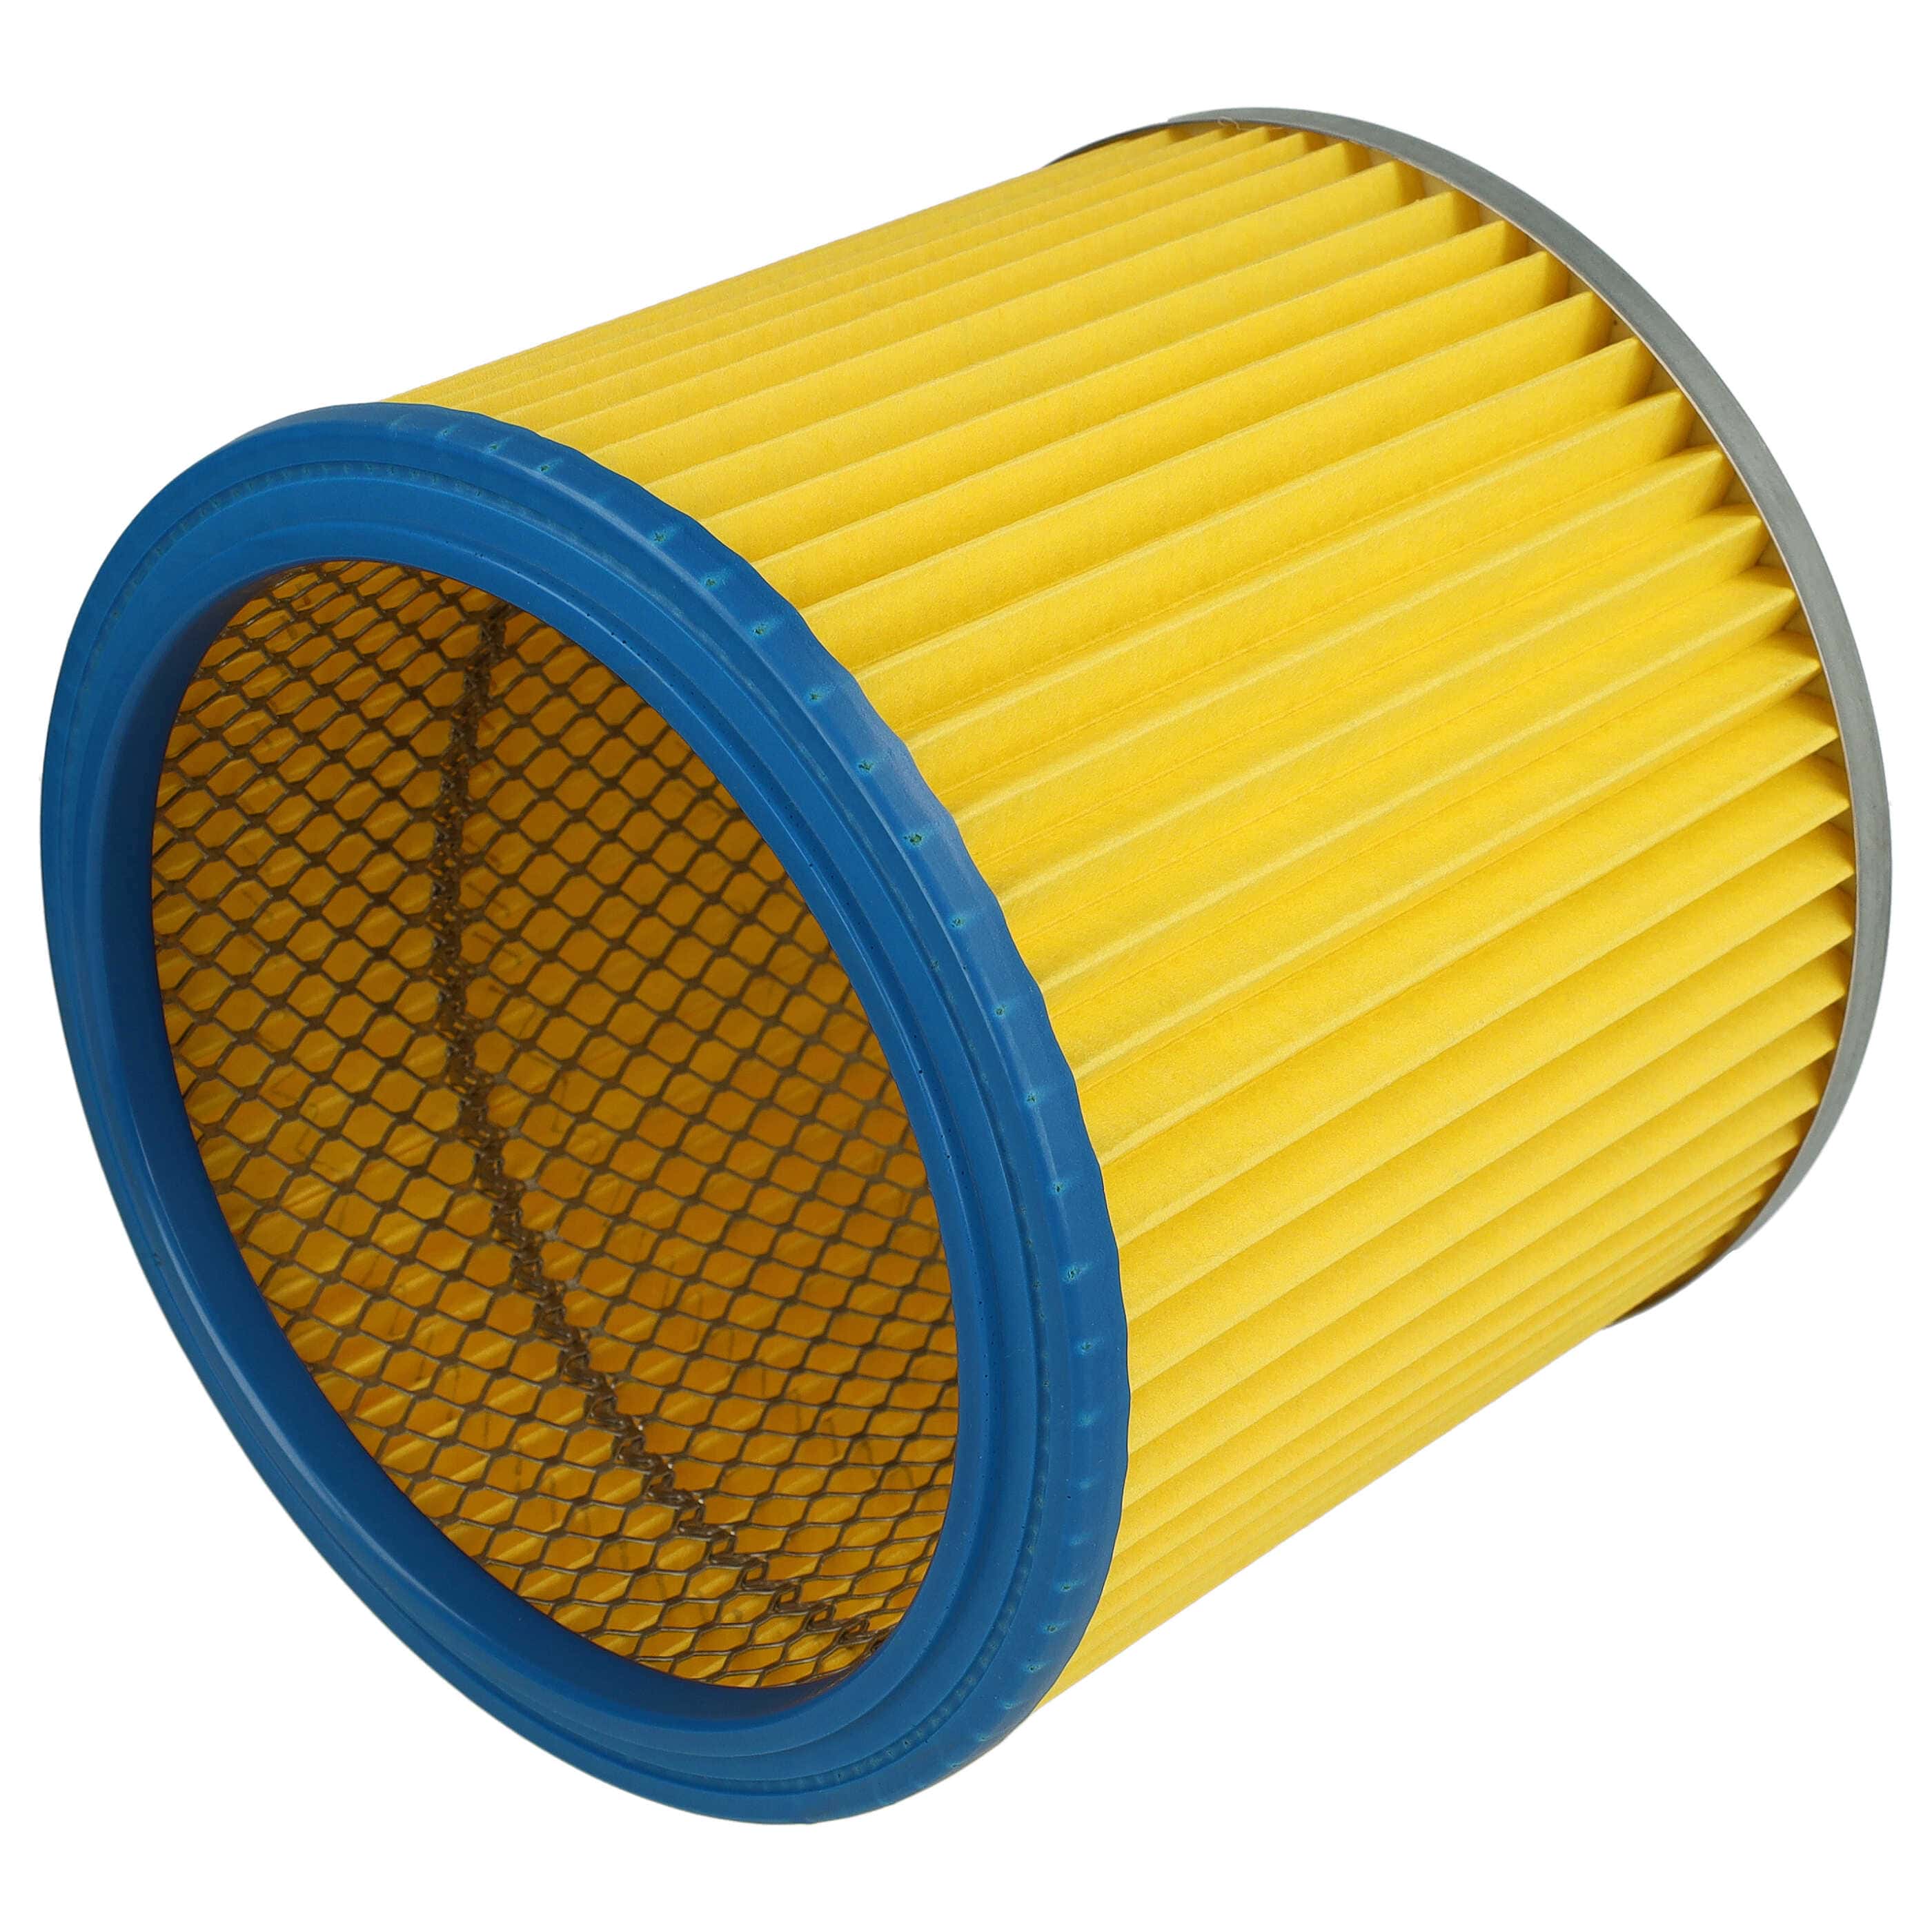 1x cartridge filter replaces Einhell 2351110 for LIVVacuum Cleaner, blue / yellow